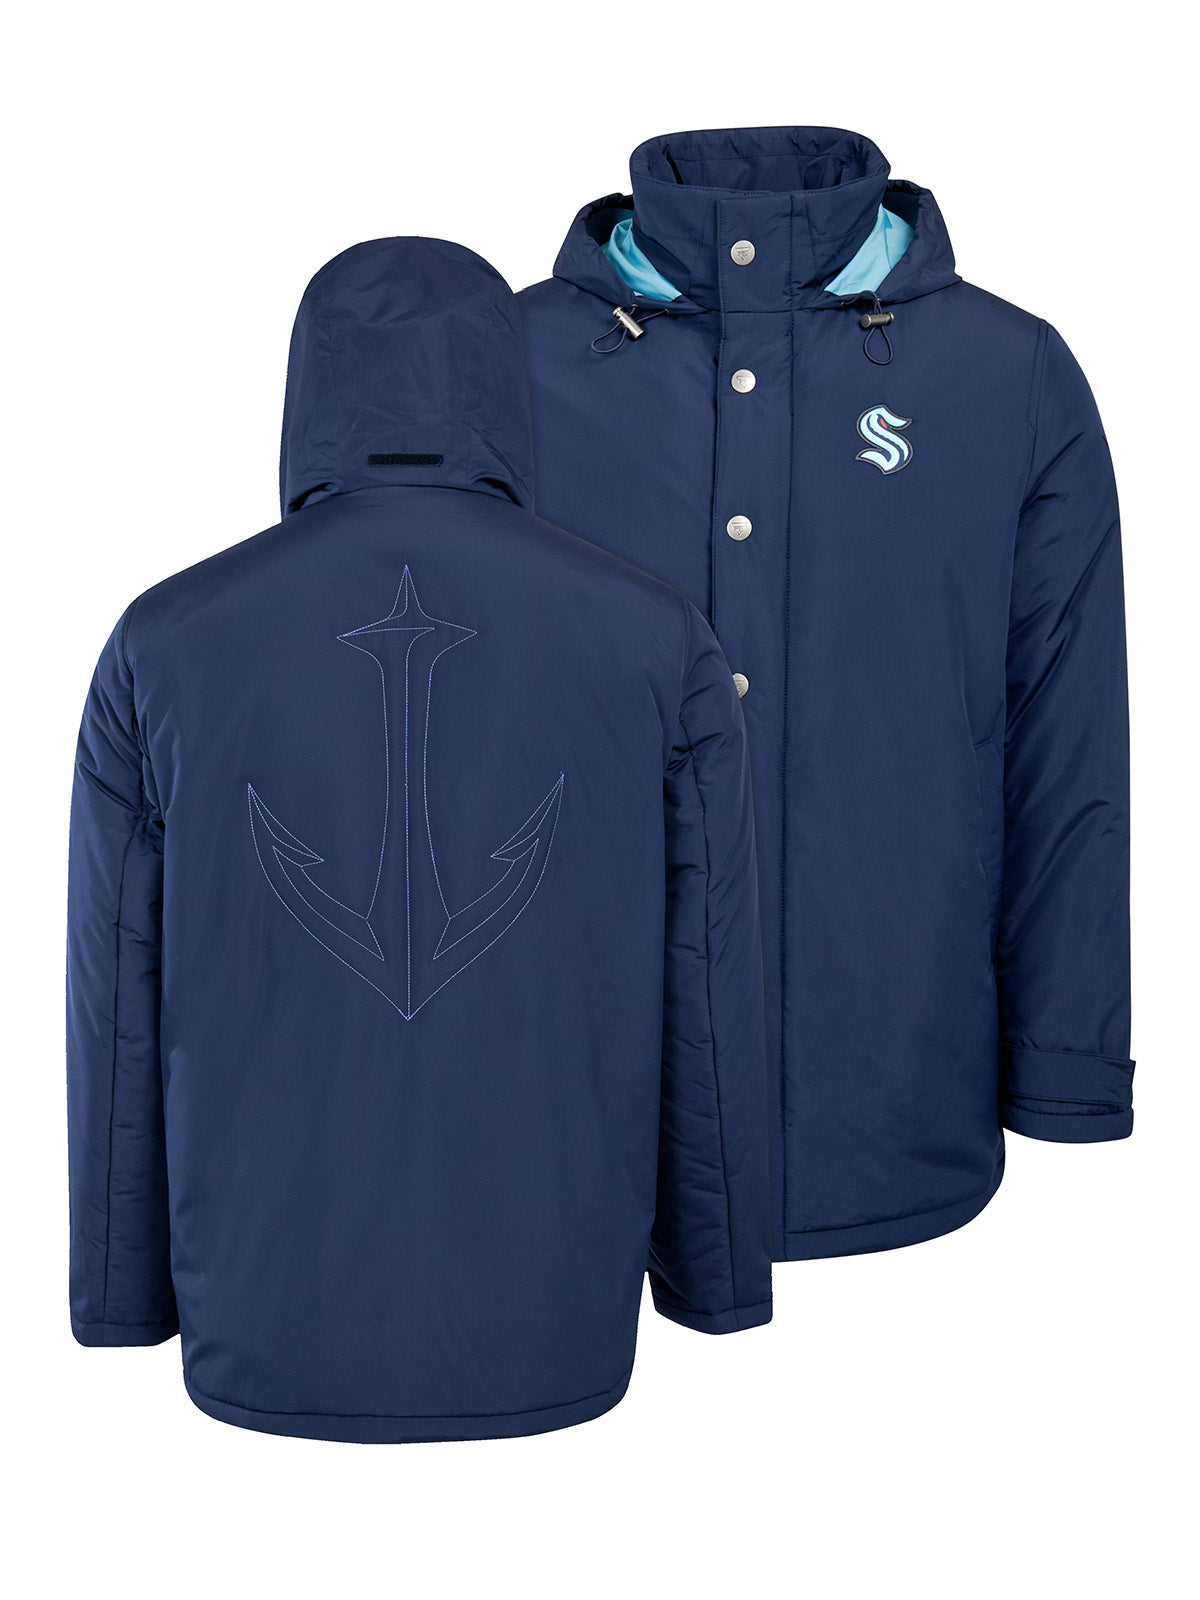 Seattle Kraken Coach's Jacket - The jacket features a quilted stitch of the Seattle Kraken logo centered on the back and has a removal hood in the team colors, elevating this NHL hockey clothing collection